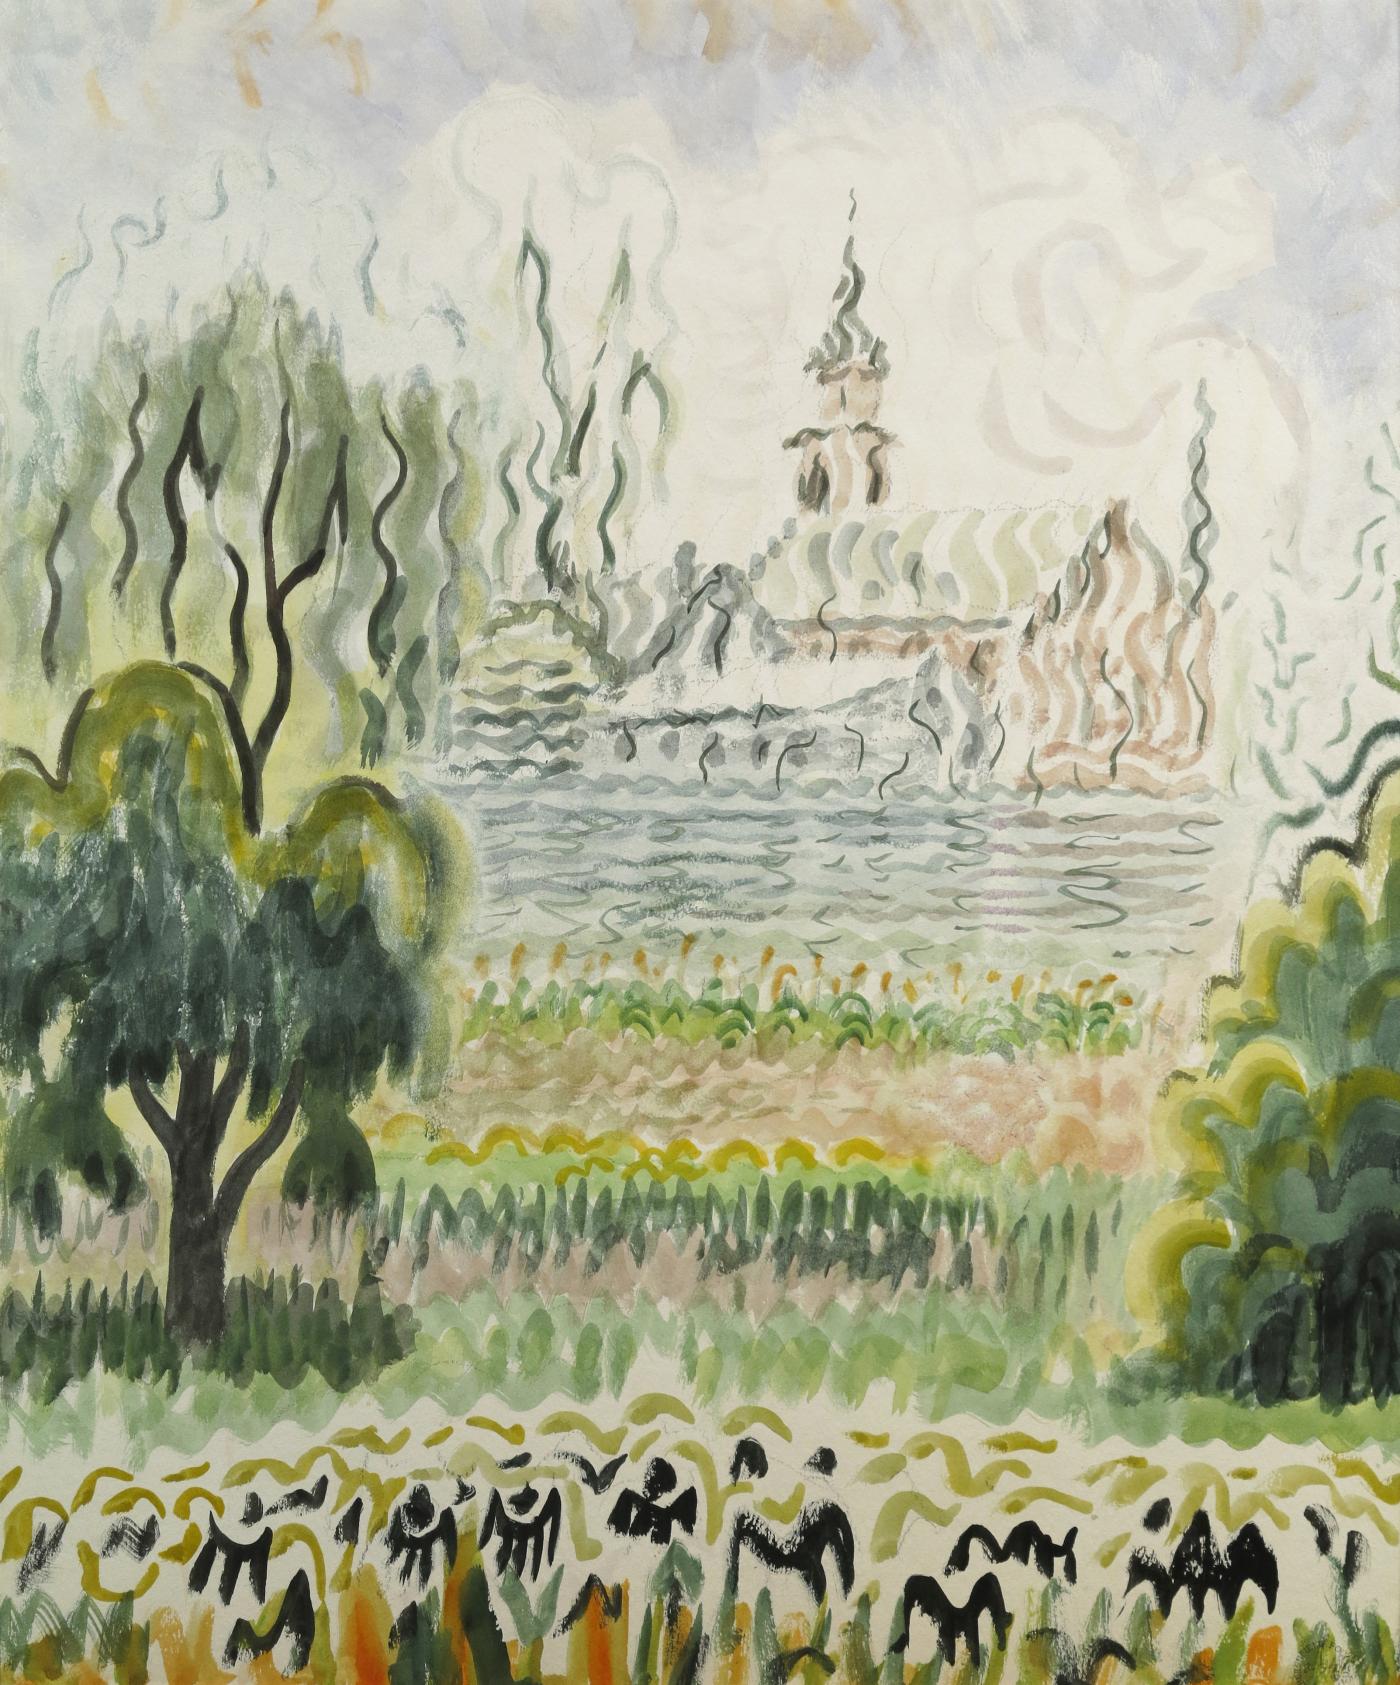 Charles Burchfield’s Wallpaper Designs To Go On View At The Arkell